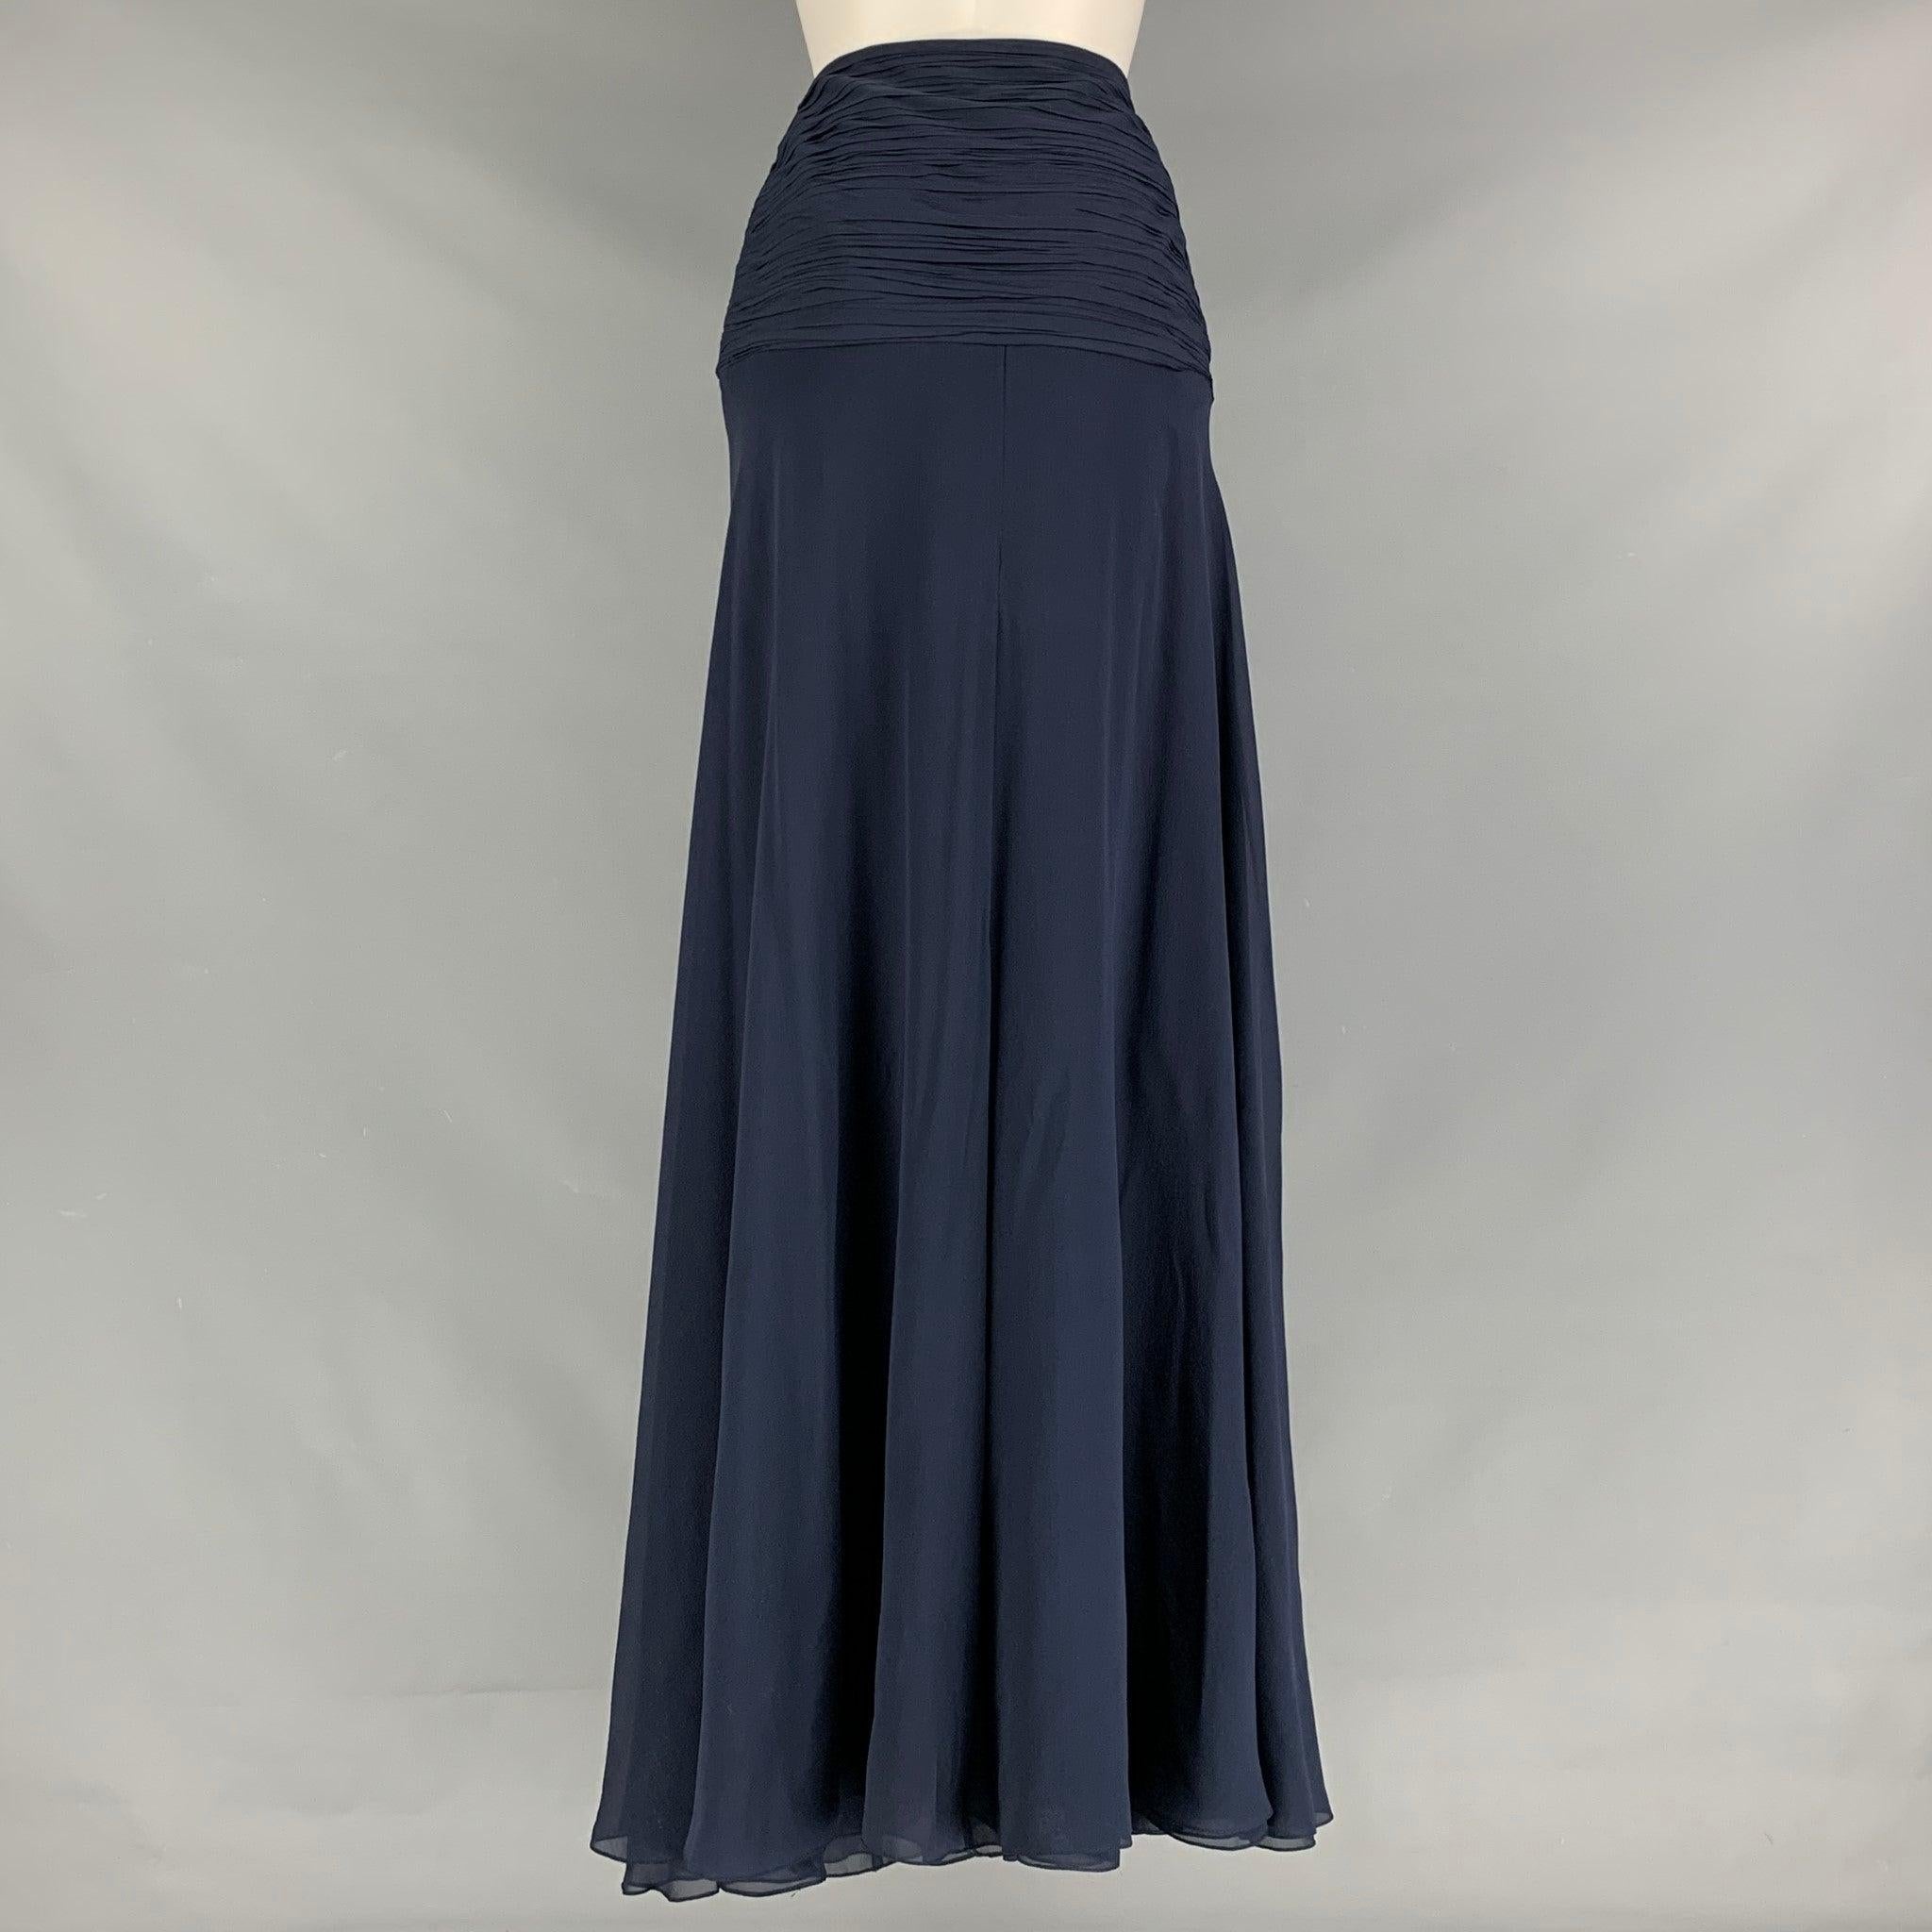 RALPH LAUREN COLLECTION maxi skirt comes in a navy silk featuring a ruched waistband, invisible zipper closure at left side. Made in Italy.Excellent Pre-Owned Condition.  

Marked:   6 

Measurements: 
  Waist: 29 inches Hip: 39 inches Length: 46